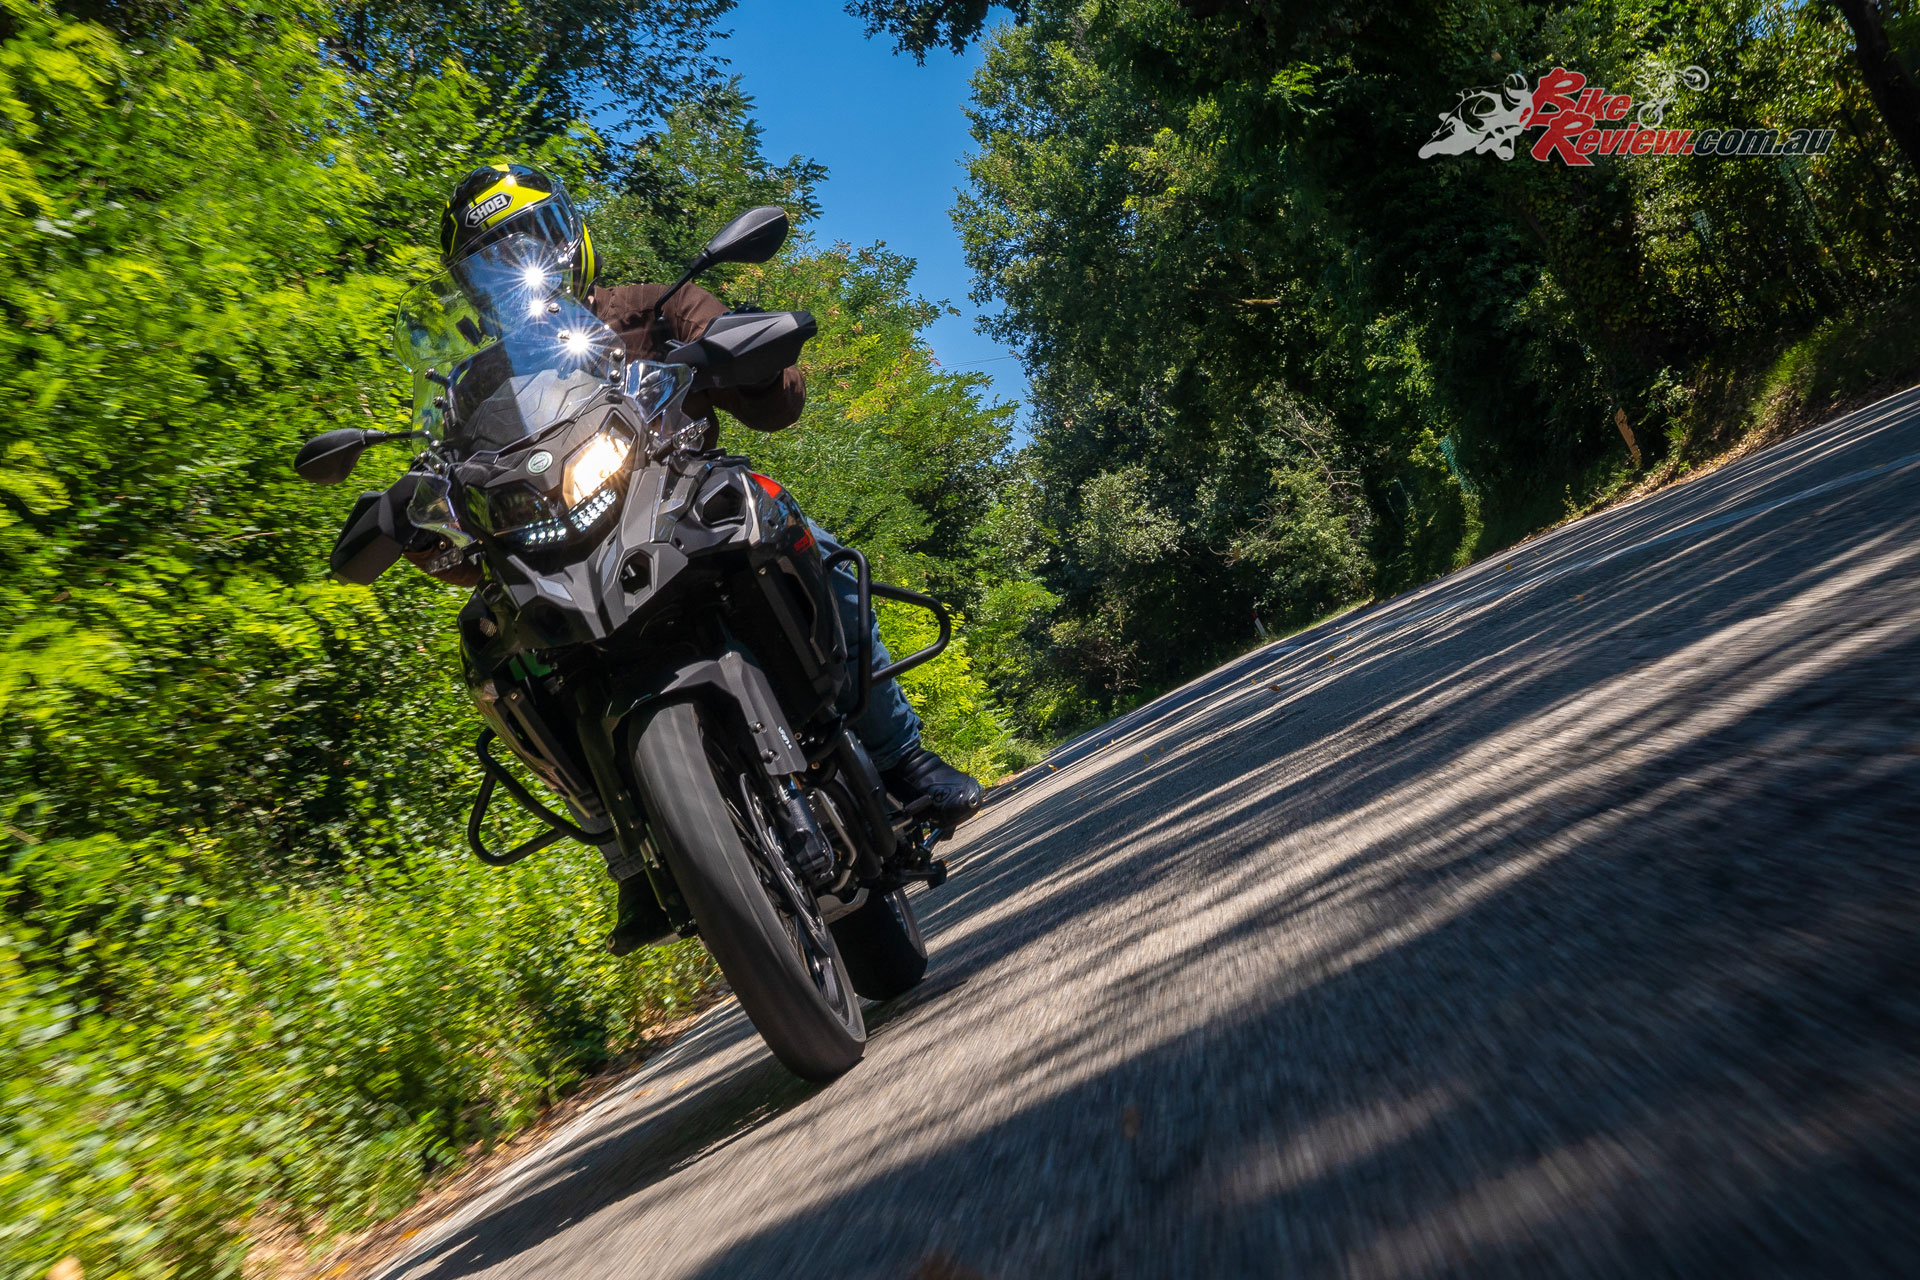 The TRK 502X's powerplant is a familiar performer after riding the Leoncino.